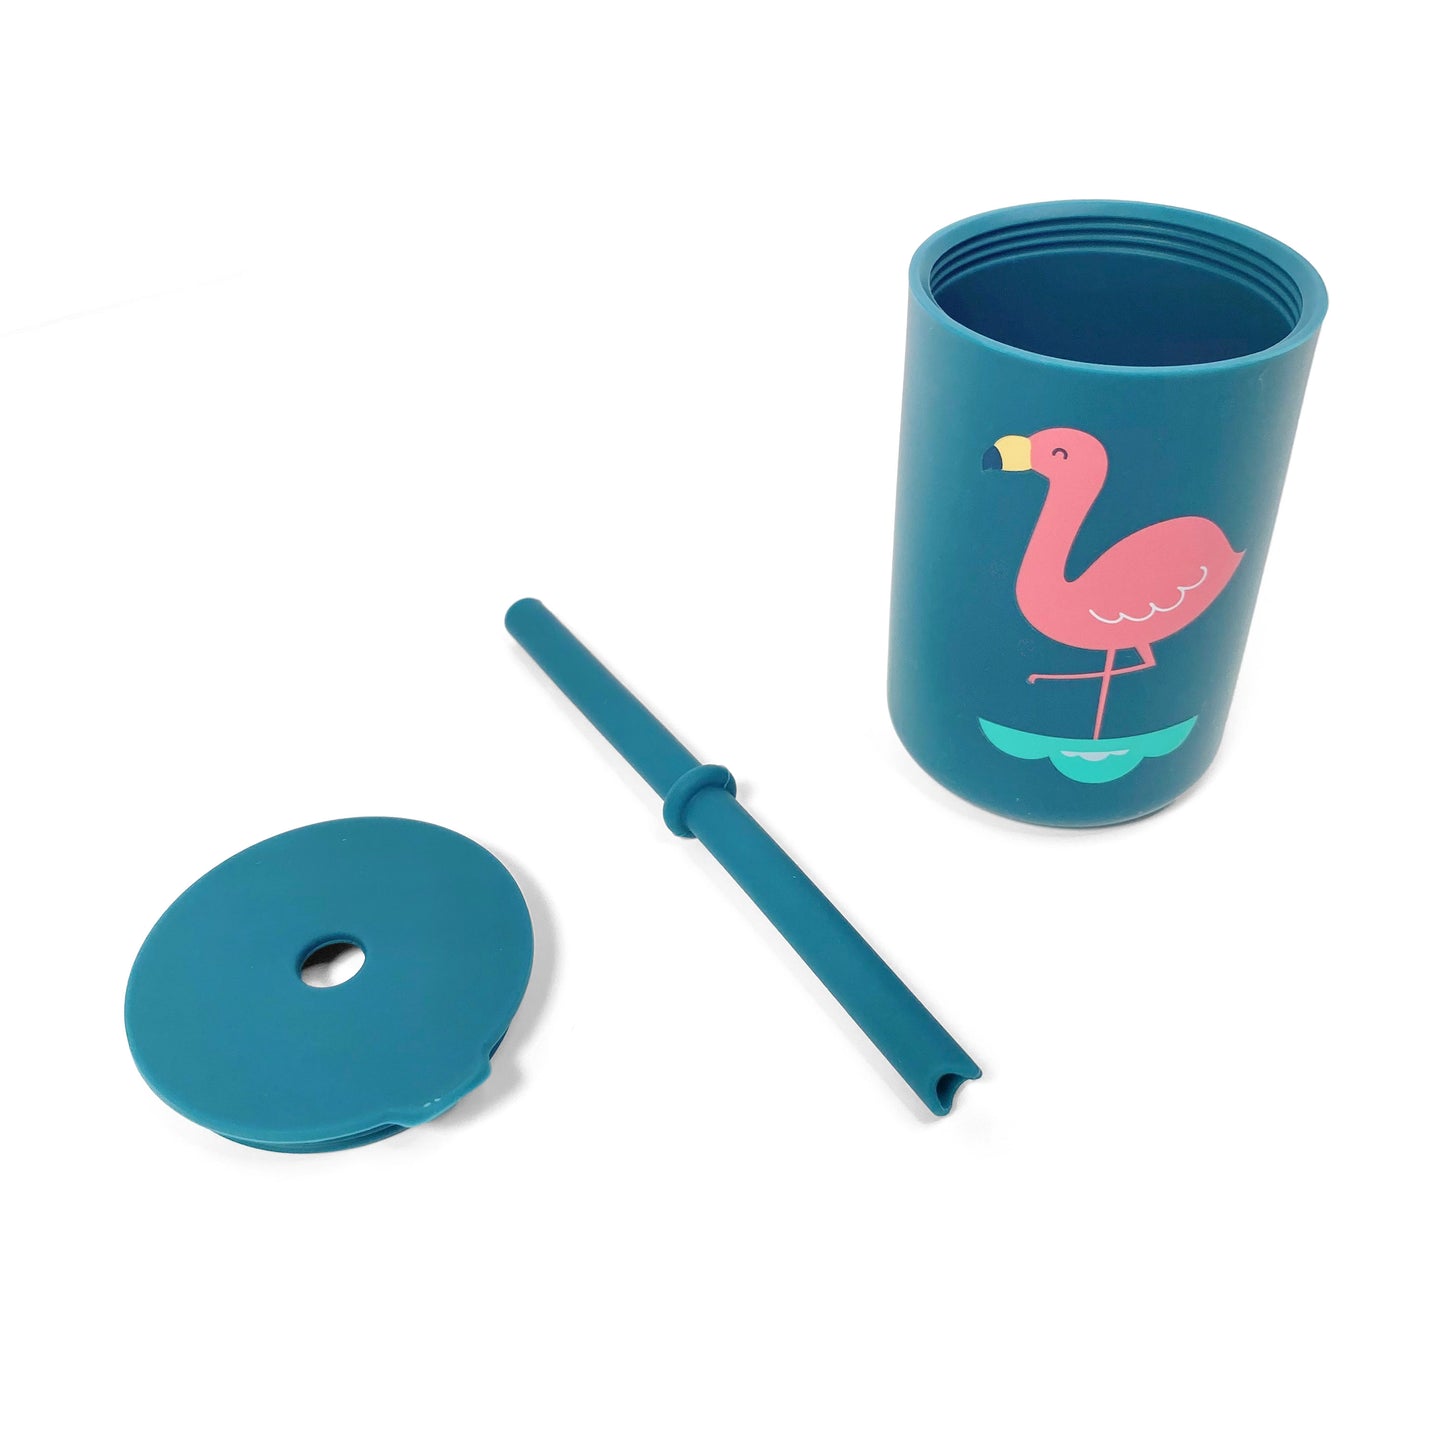 A children’s blue silicone drinking cup, with matching lid and straw, featuring a flamingo design. The image shows the cup, lid and straw separately. 